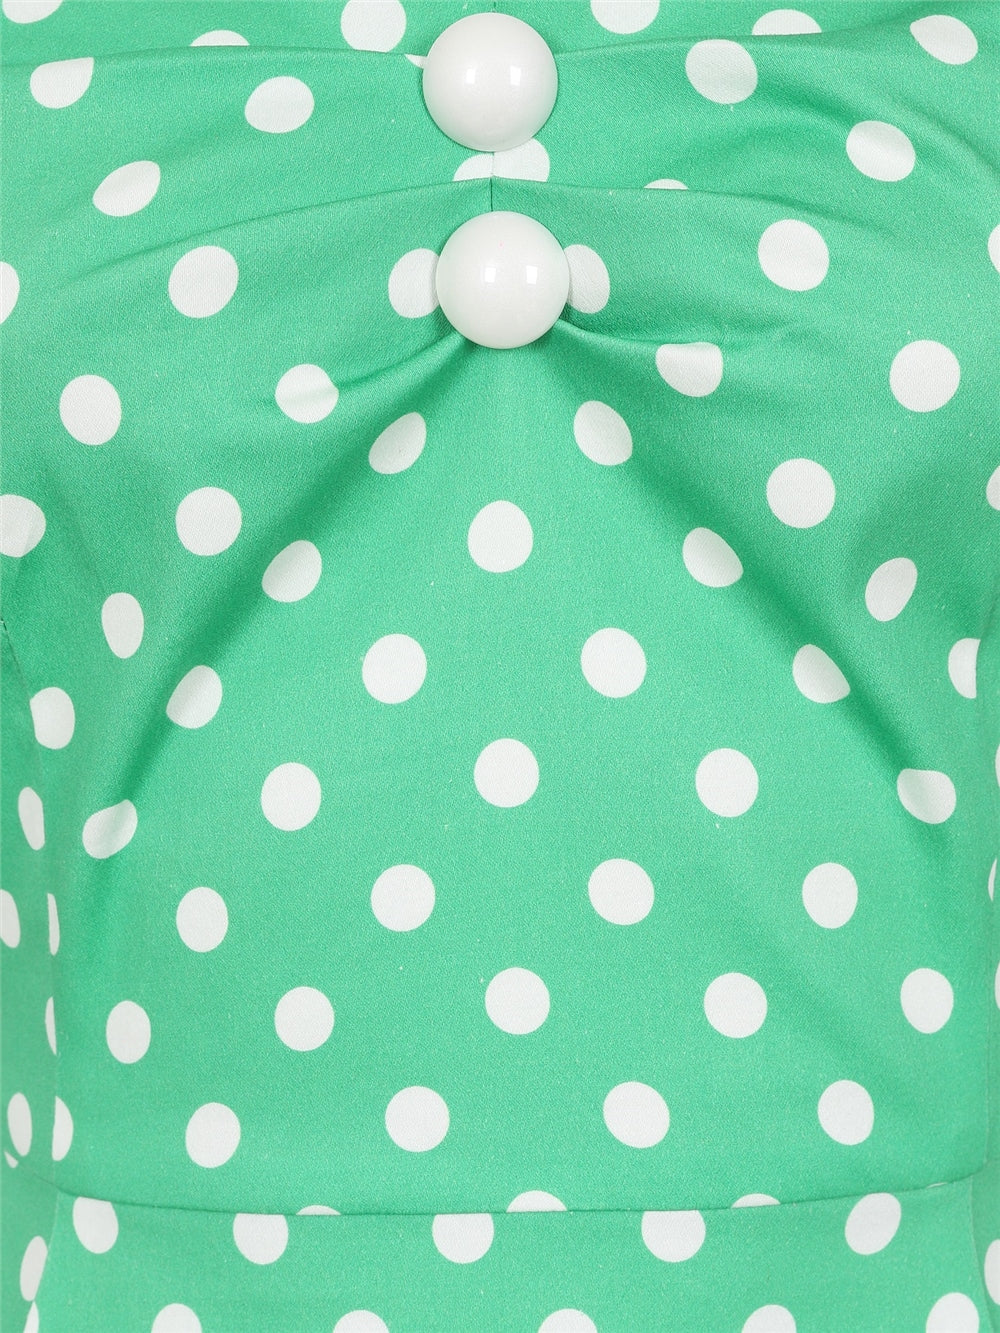 Dolores Classic Polka Doll Dress by Collectif